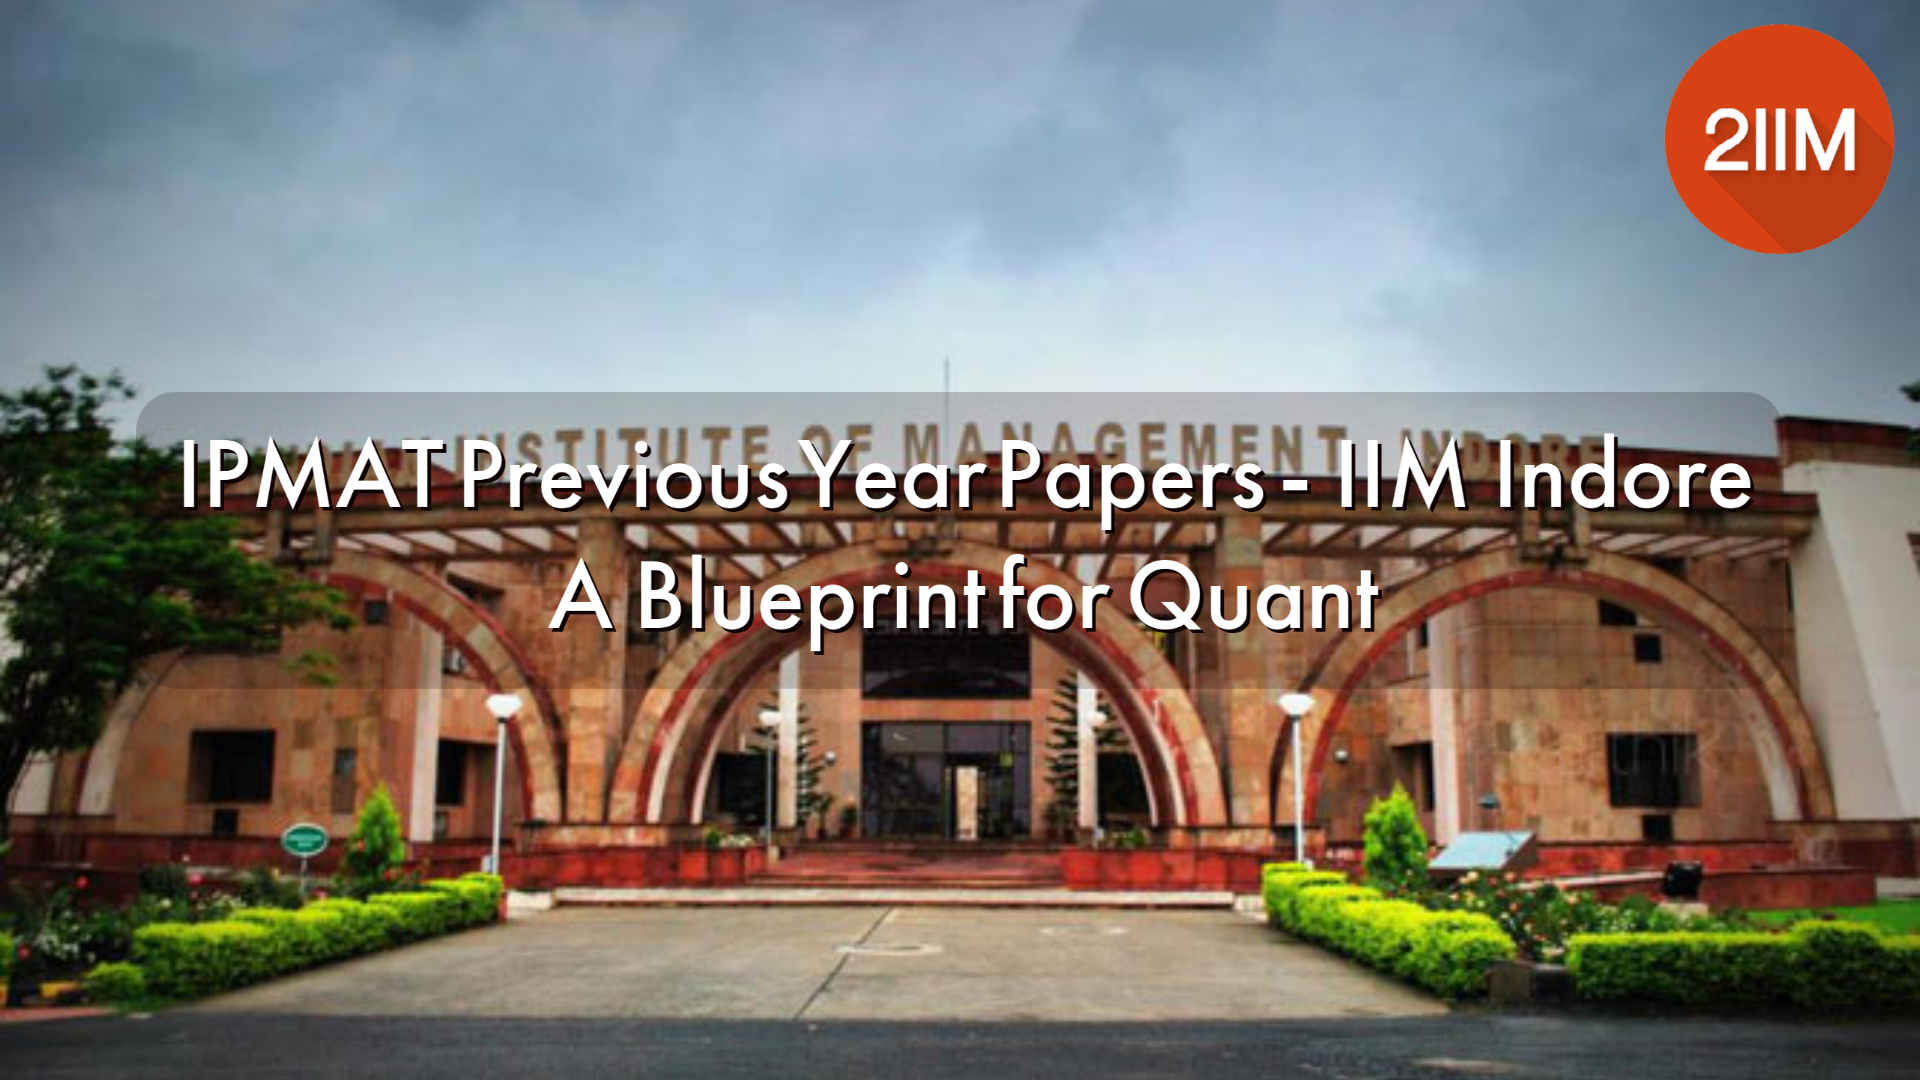 IPMAT Previous Year Papers - IIM Indore: A Blueprint for Quant